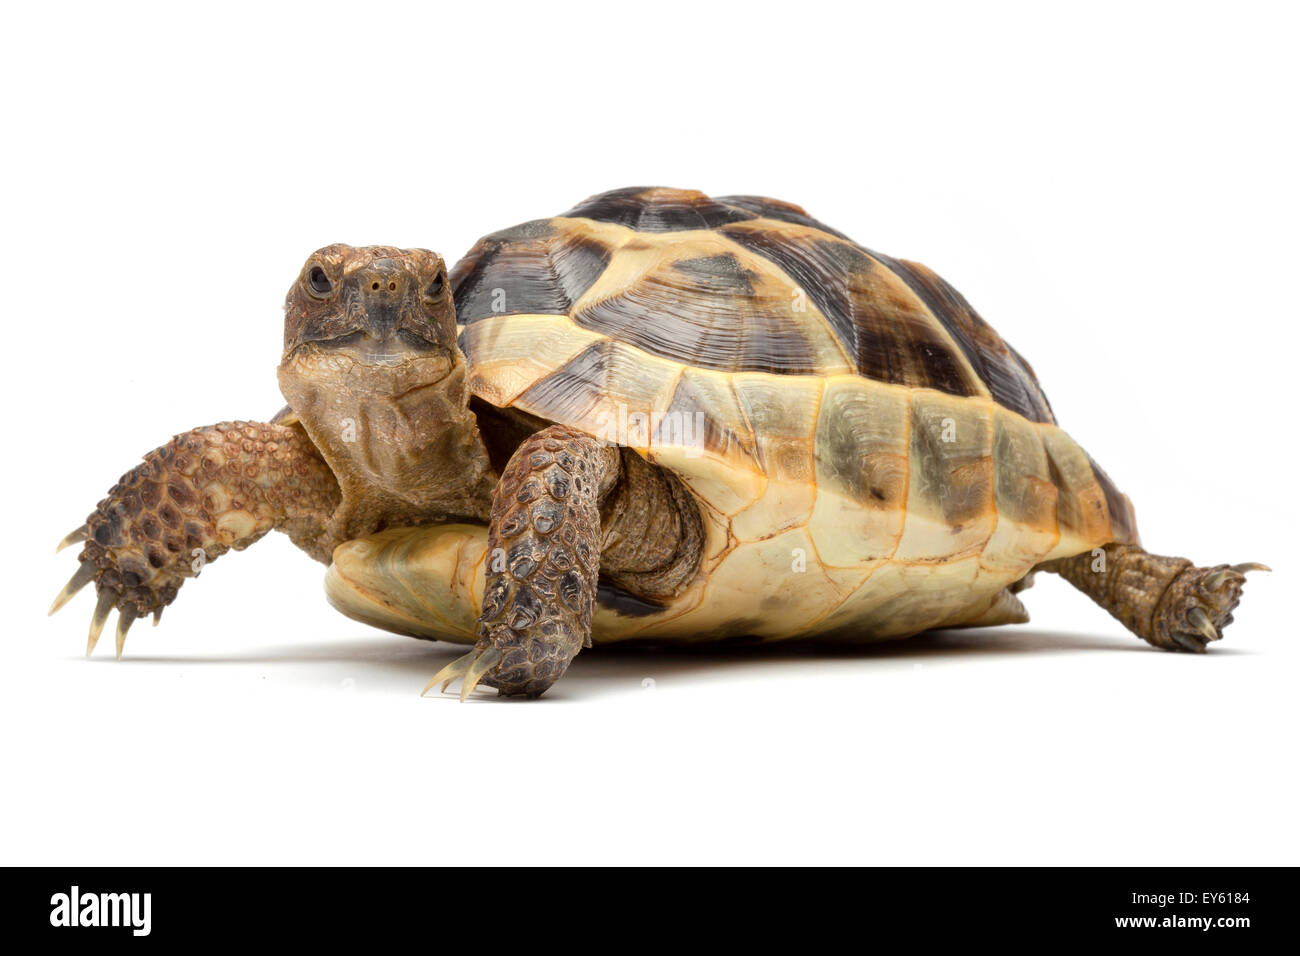 Turkish Spur-thighed Tortoise on white background Stock Photo